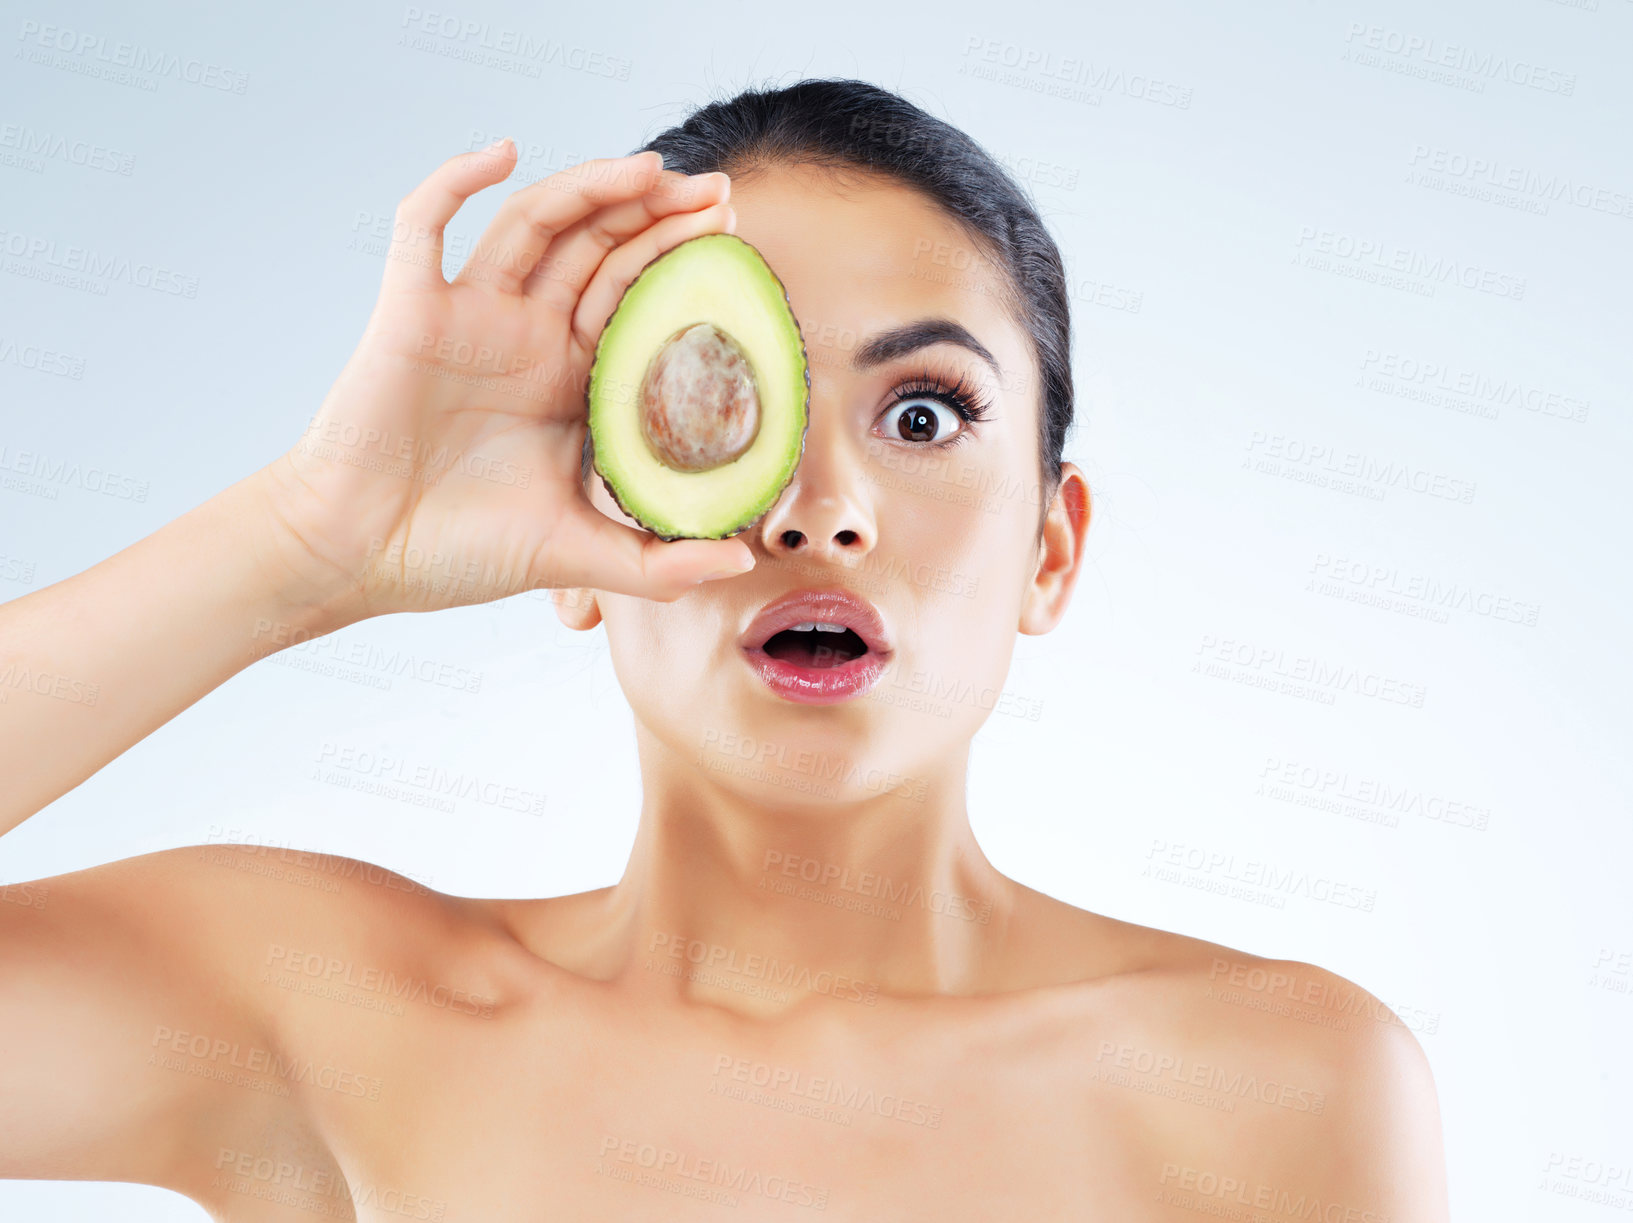 Buy stock photo Studio portrait of an attractive young woman covering her eye with an avocado against a gray background